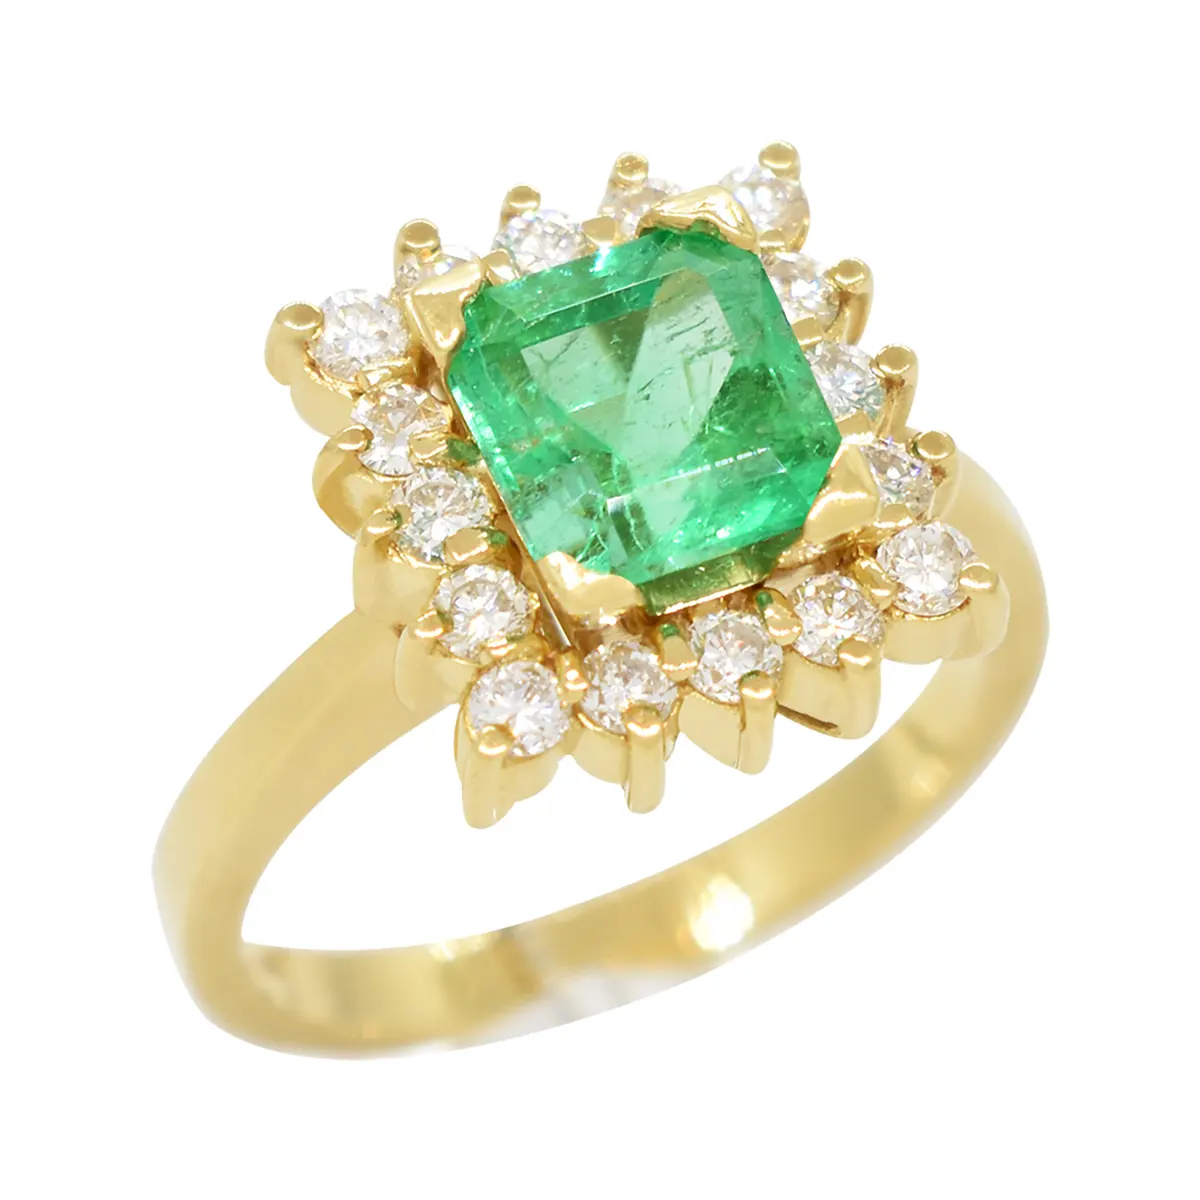 emerald-cut-emerald-set-in-18k-gold-ring-with-diamond-halo-in-cocktail-ring-style